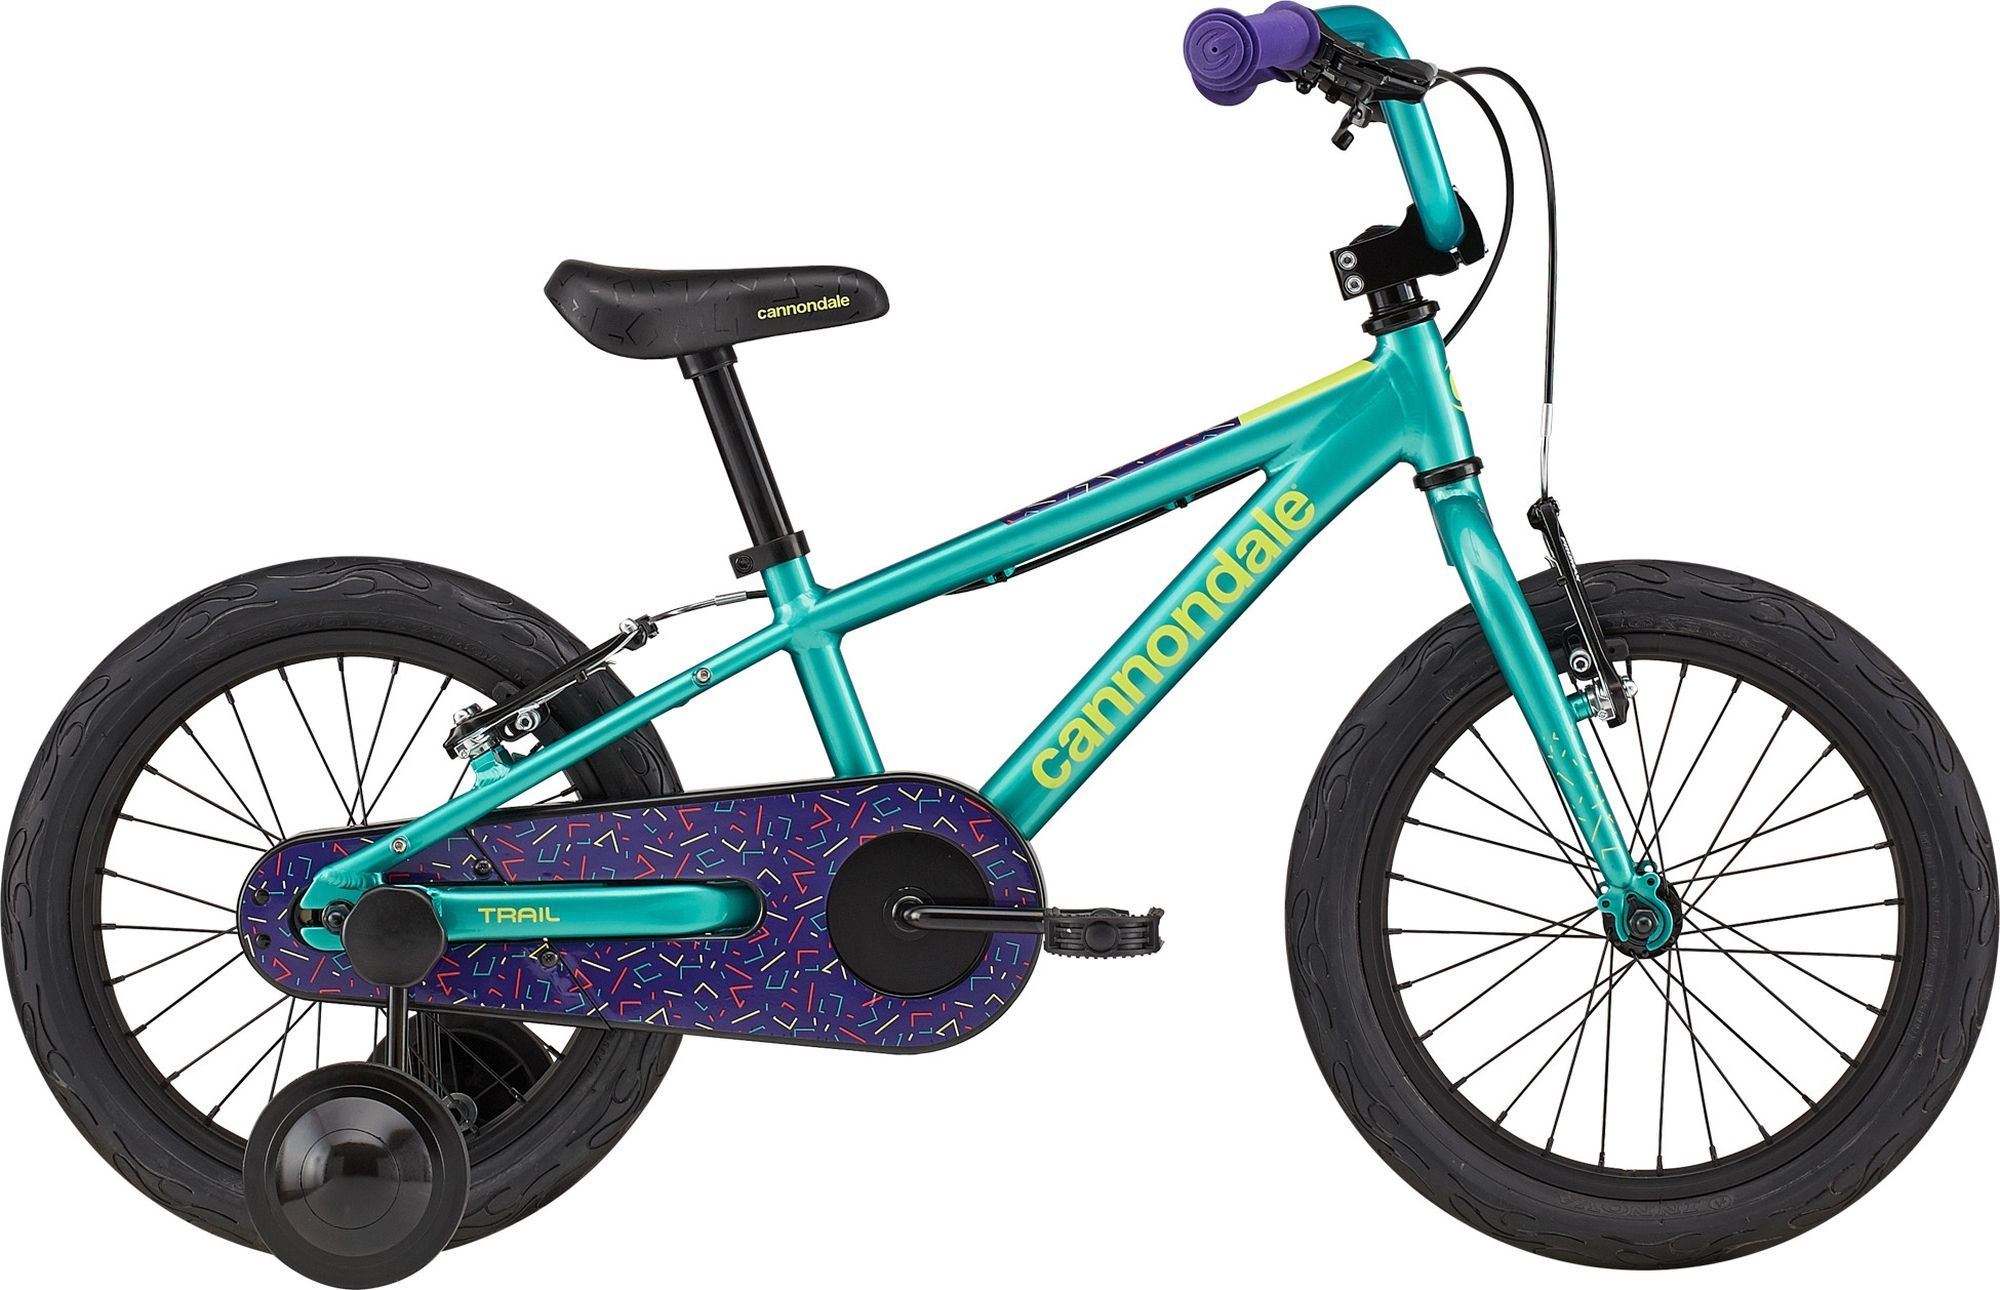 Cannondale Trail 16" Girls FW - Turqoise